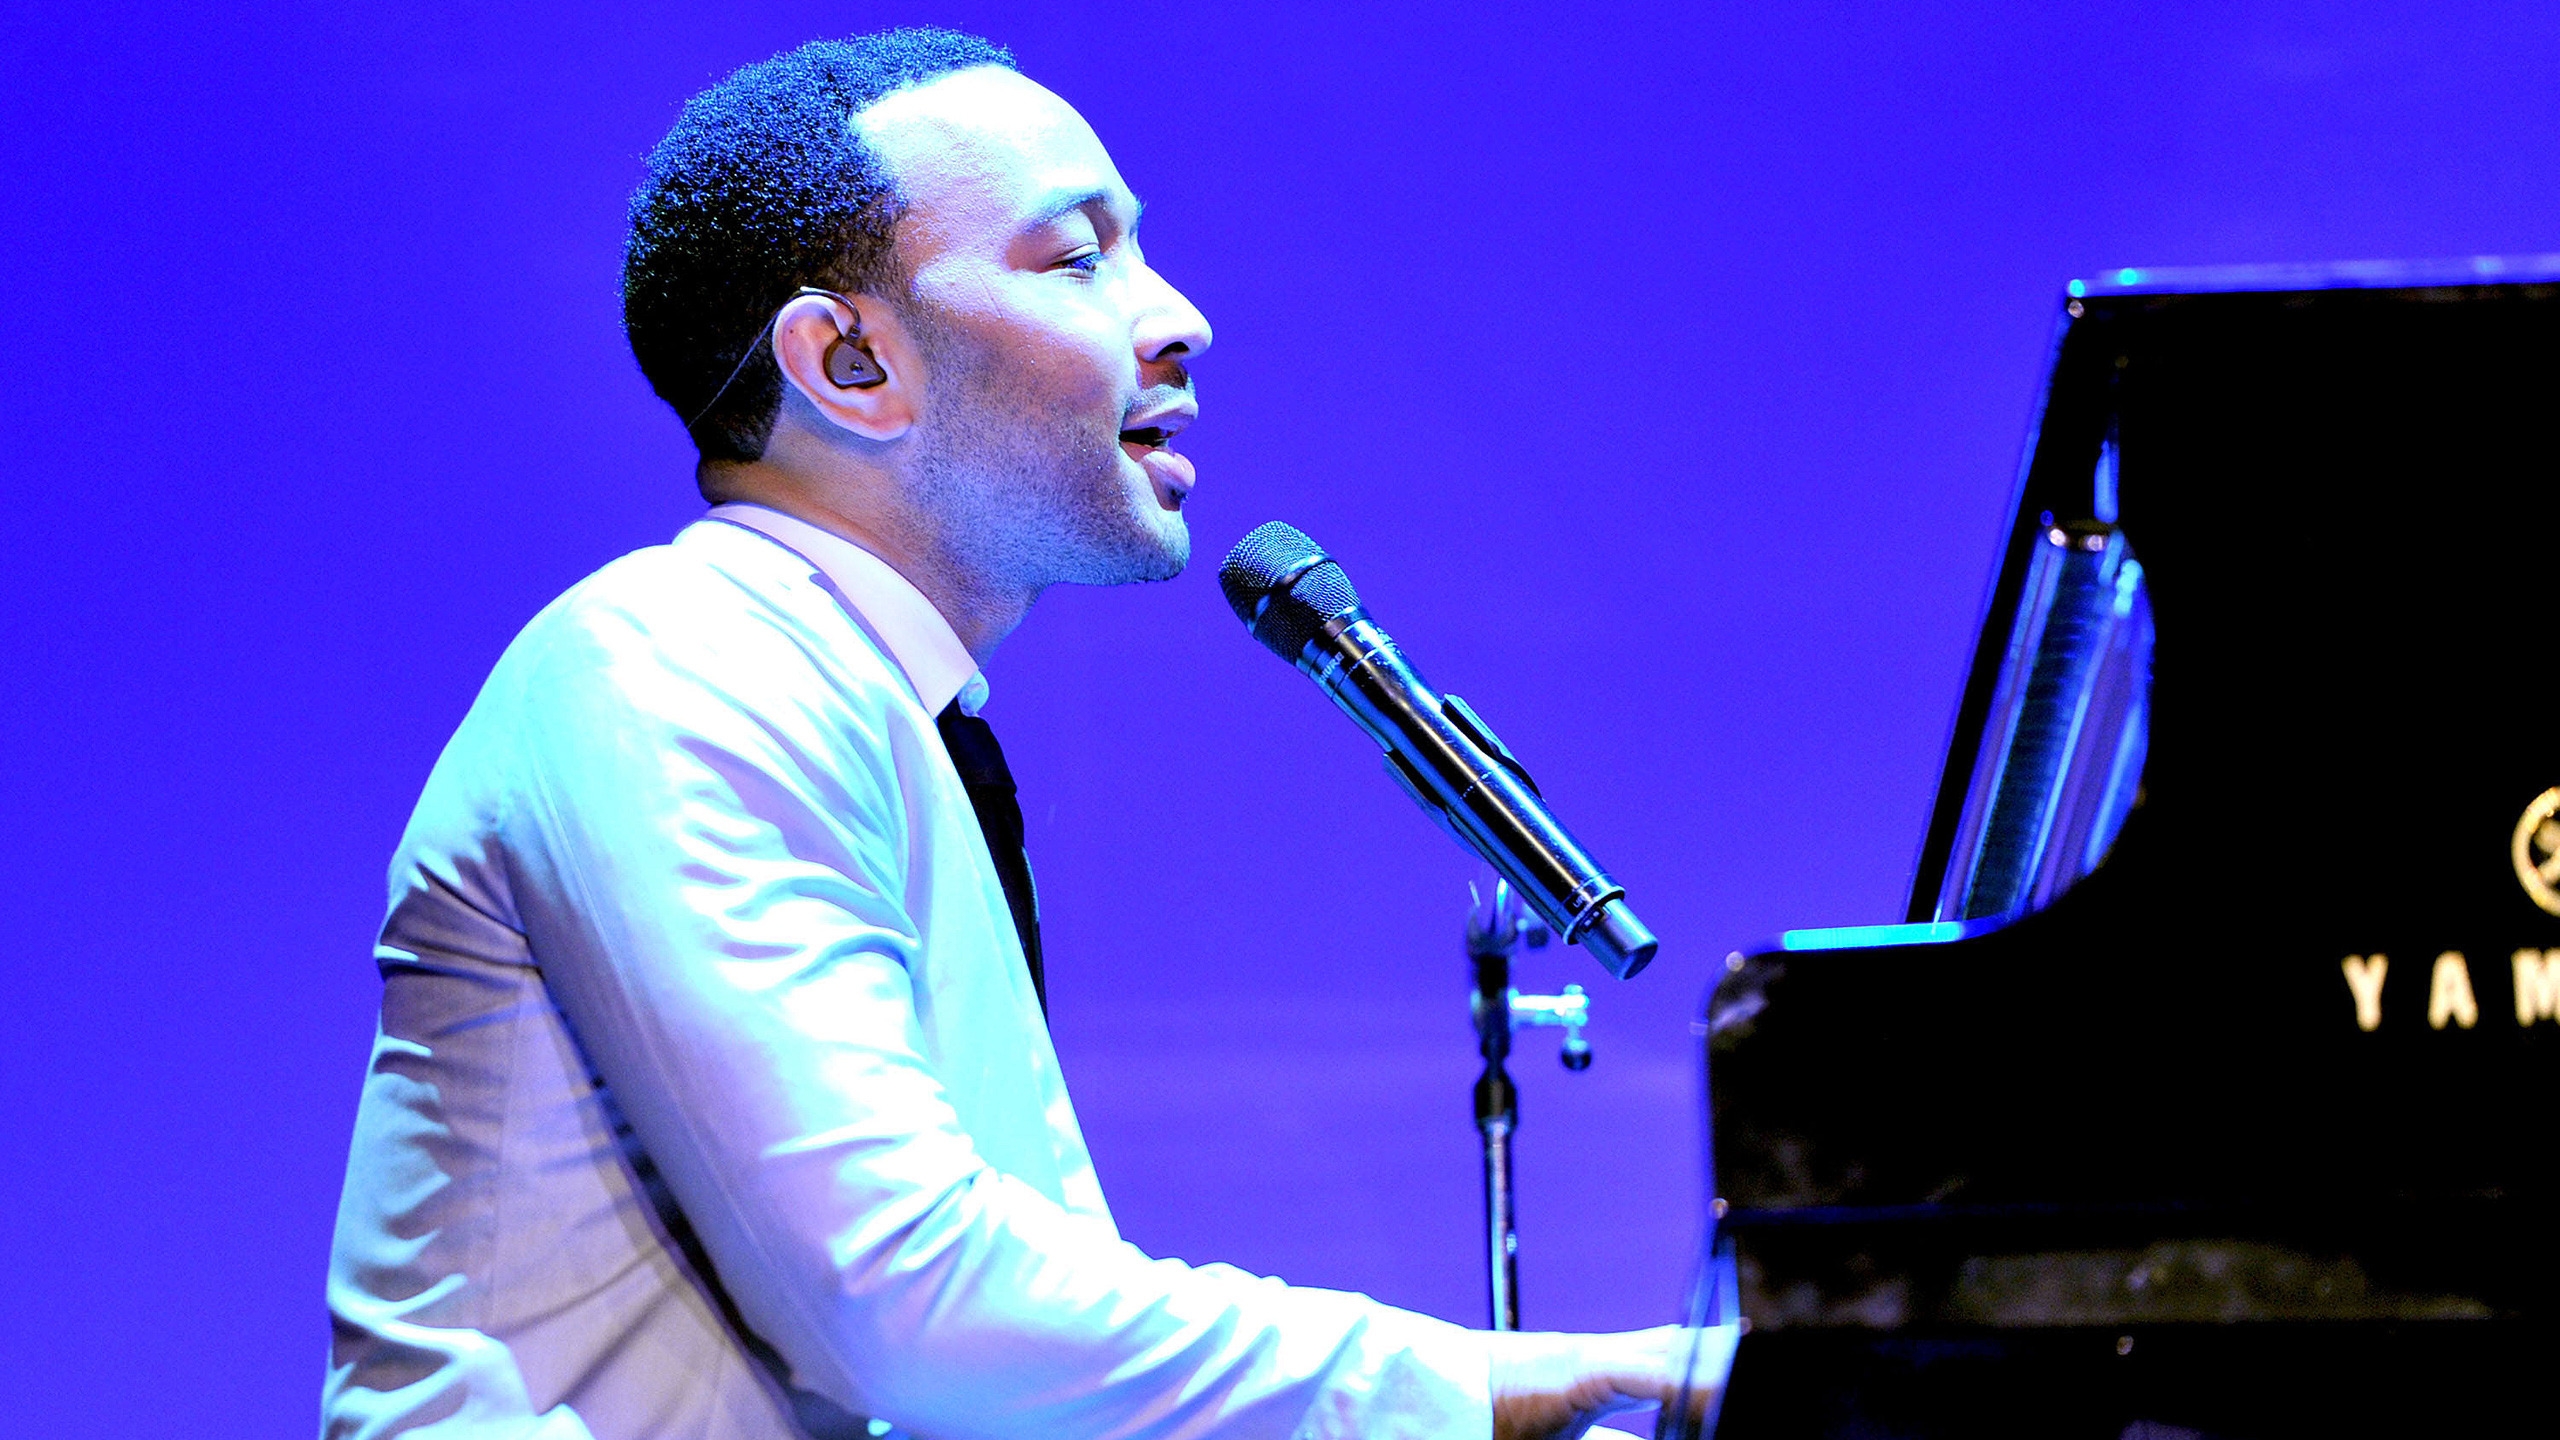 John Legend at Piano for 2560x1440 HDTV resolution